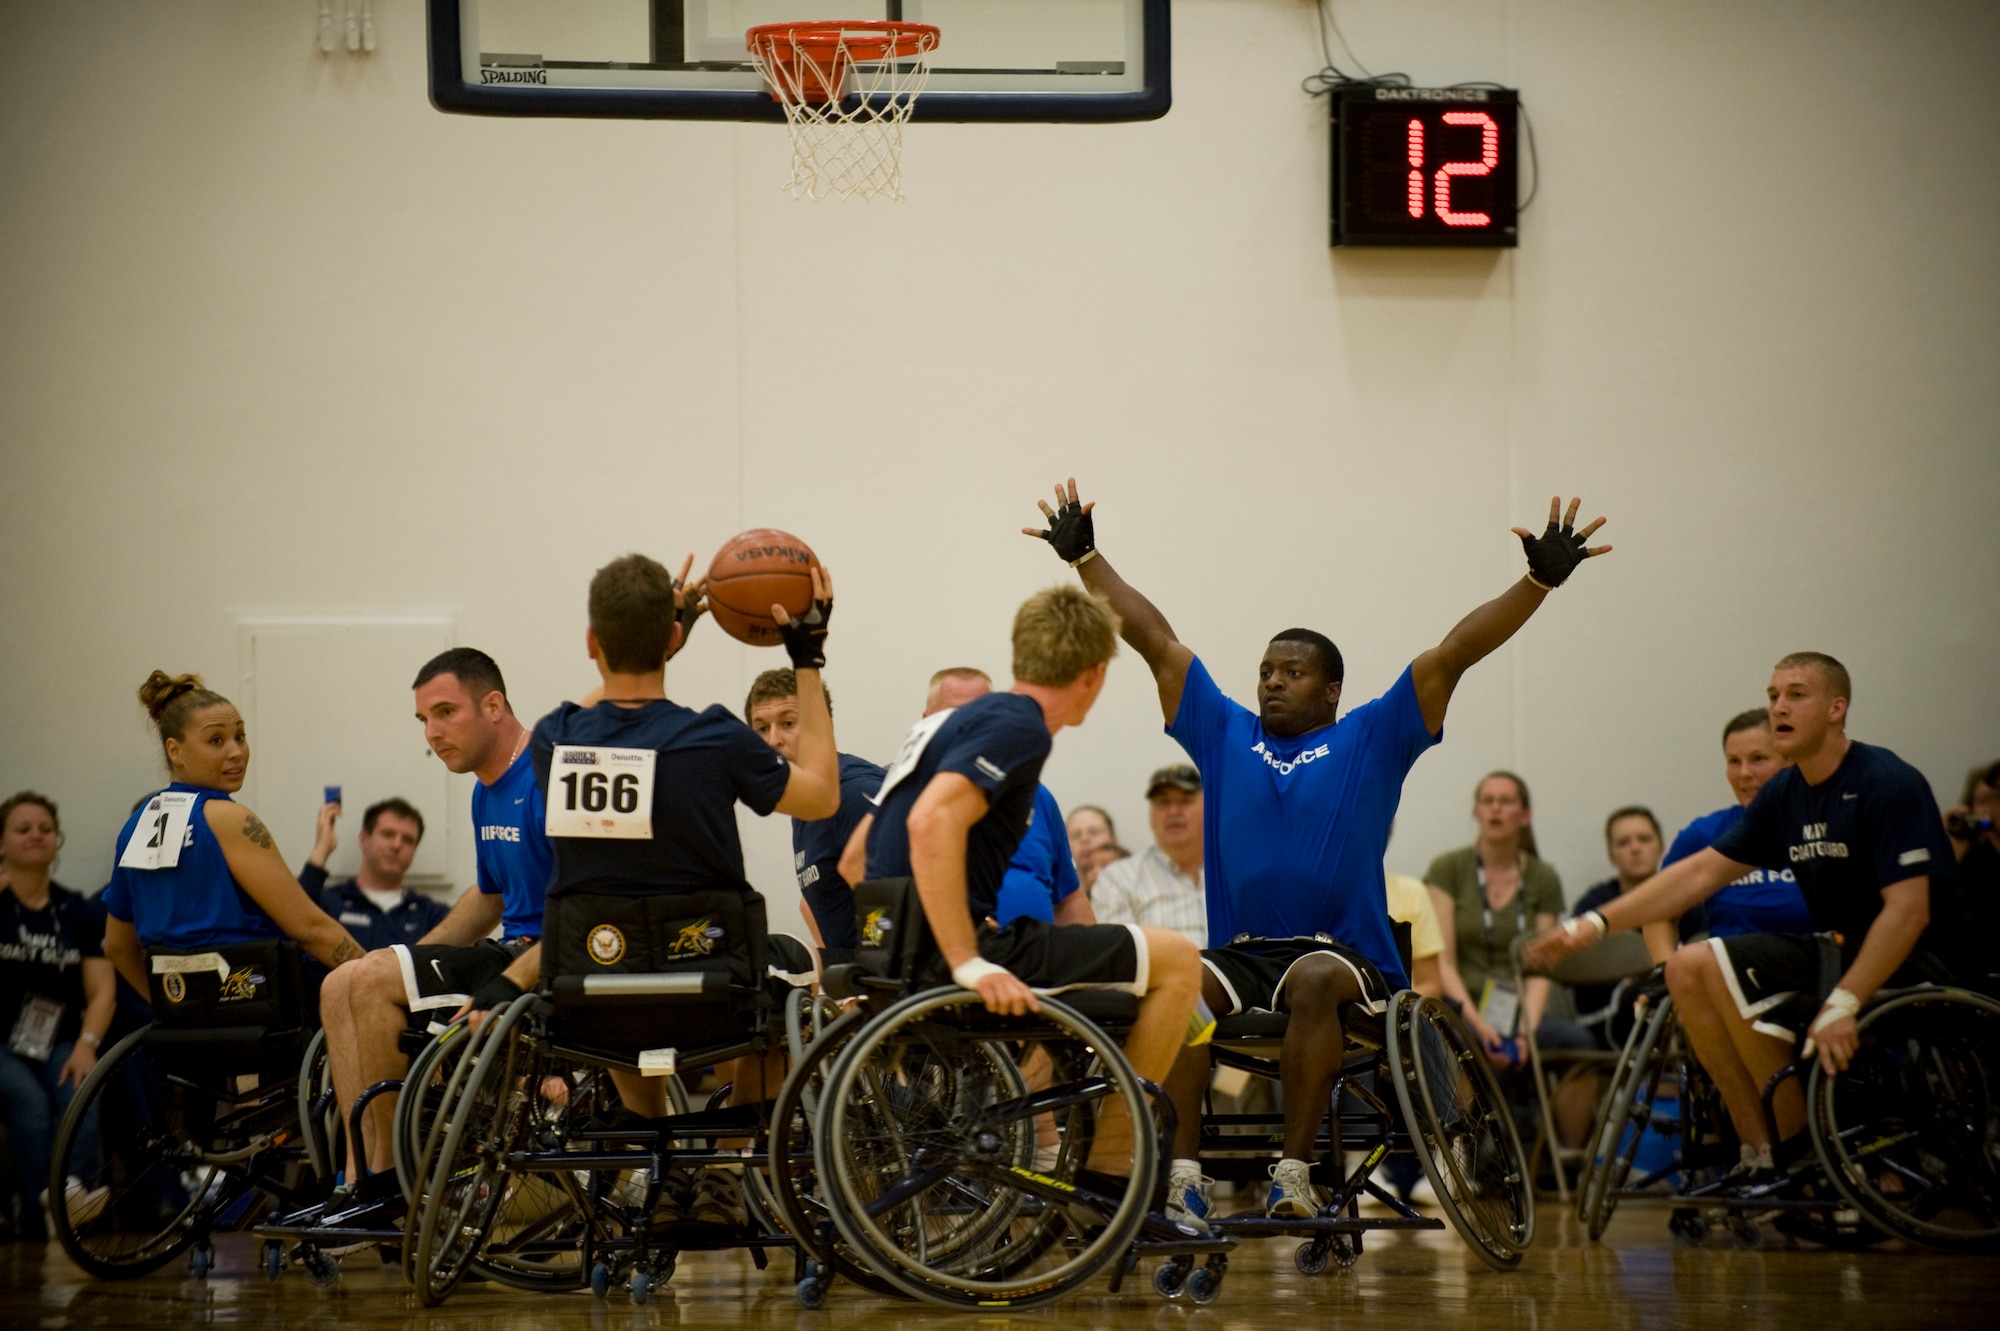 Air Force wheelchair basketball team members scramble as a Navy team member prepares to shoot during their game May 17, 2011, at the 2011 Warrior Games in Colorado Springs, Colo.  The Navy beat the Air Force 23-14 and next will face the Marine Corps.  The Air Force team plays the Army. (U.S. Air Force photo/Staff Sgt. Christopher Griffin)